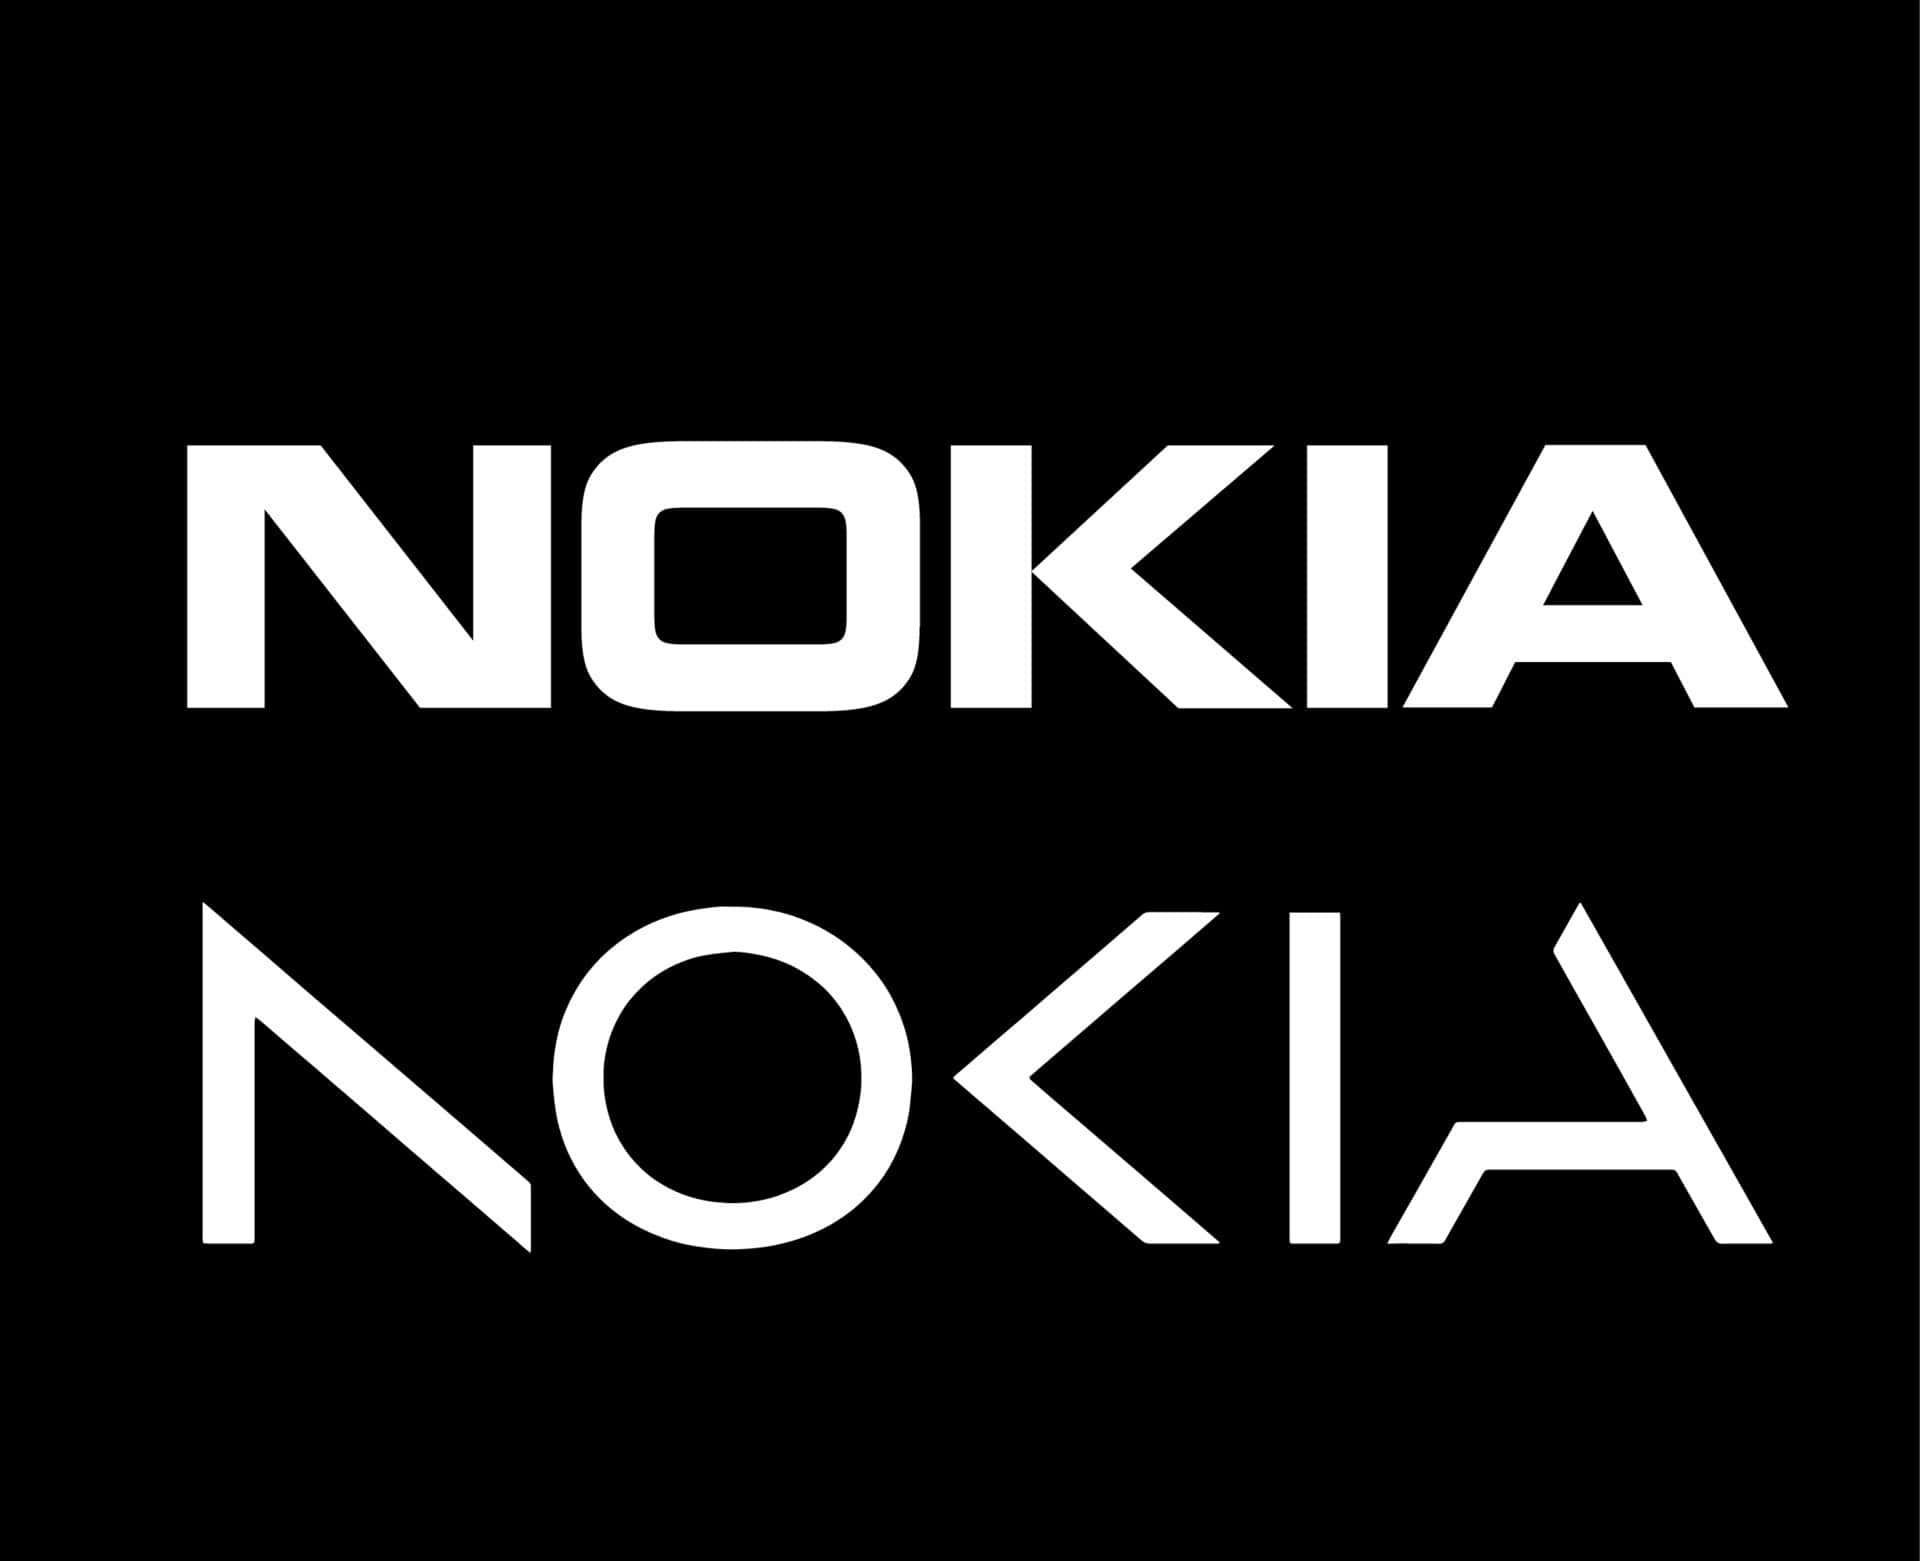 Experience ultimate sound quality with the Nokia wireless headphones